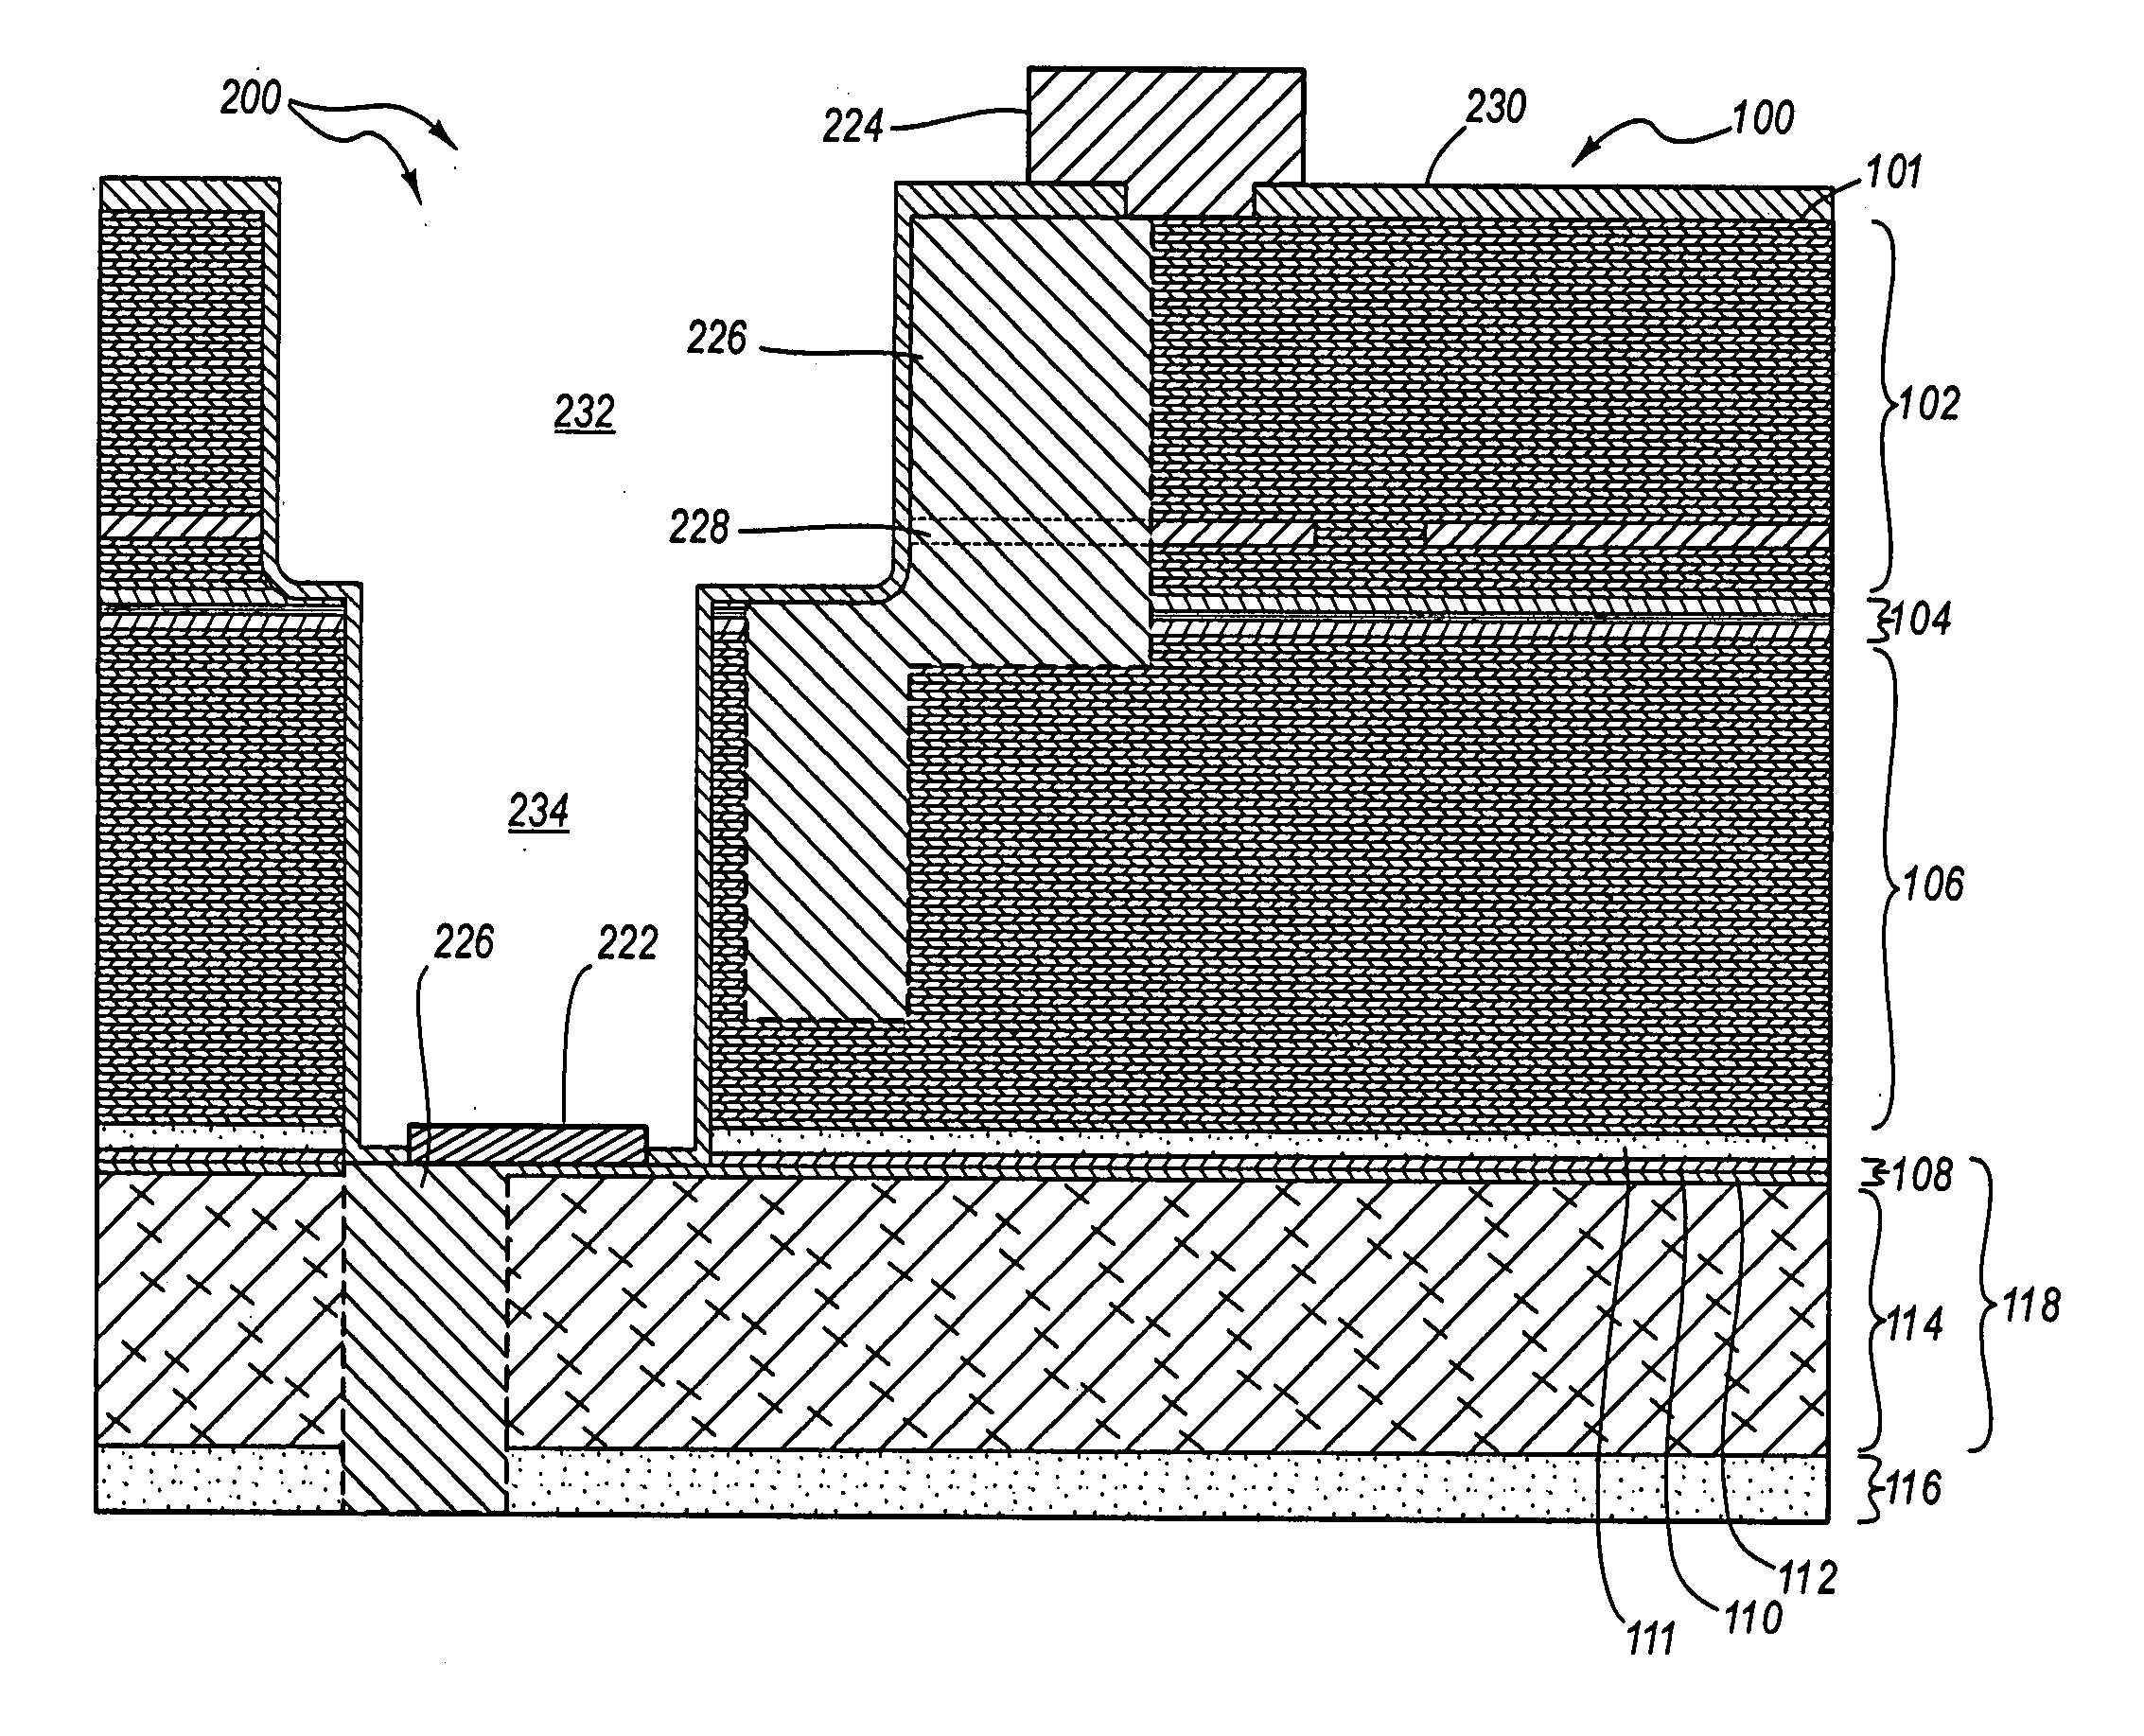 Light emitting device with an integrated monitor photodiode